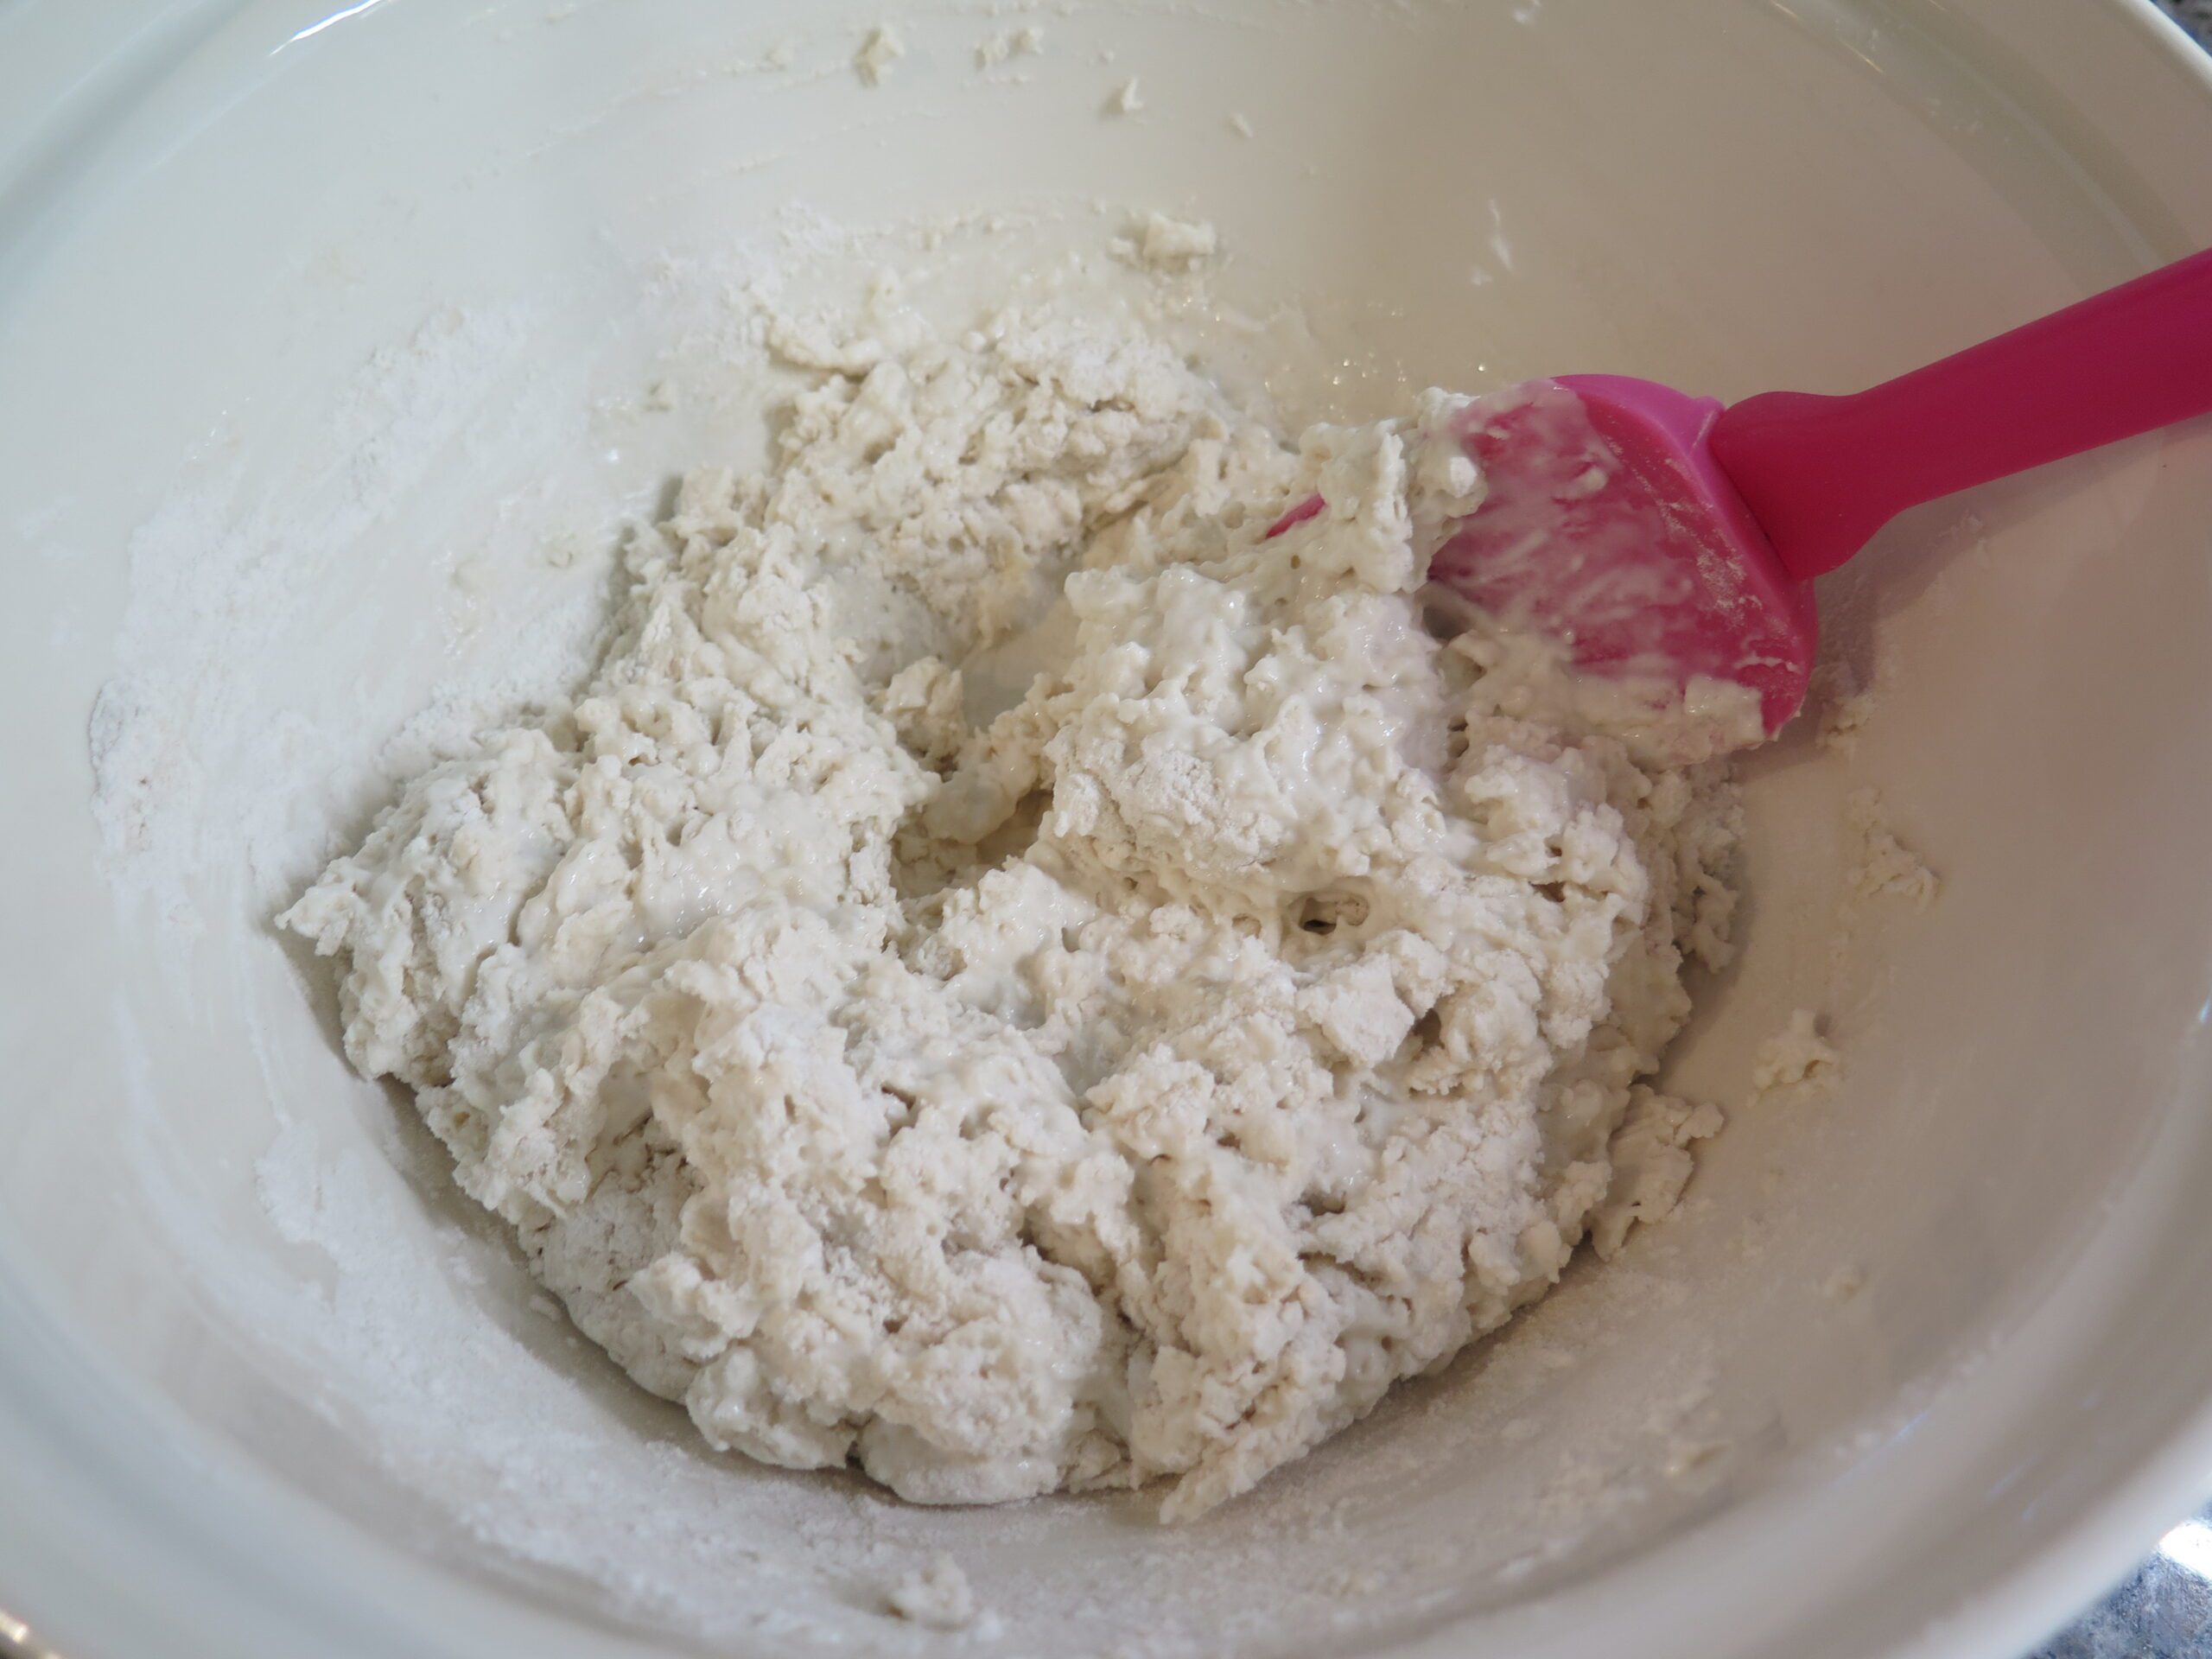 wet ingredients added to dry mixture